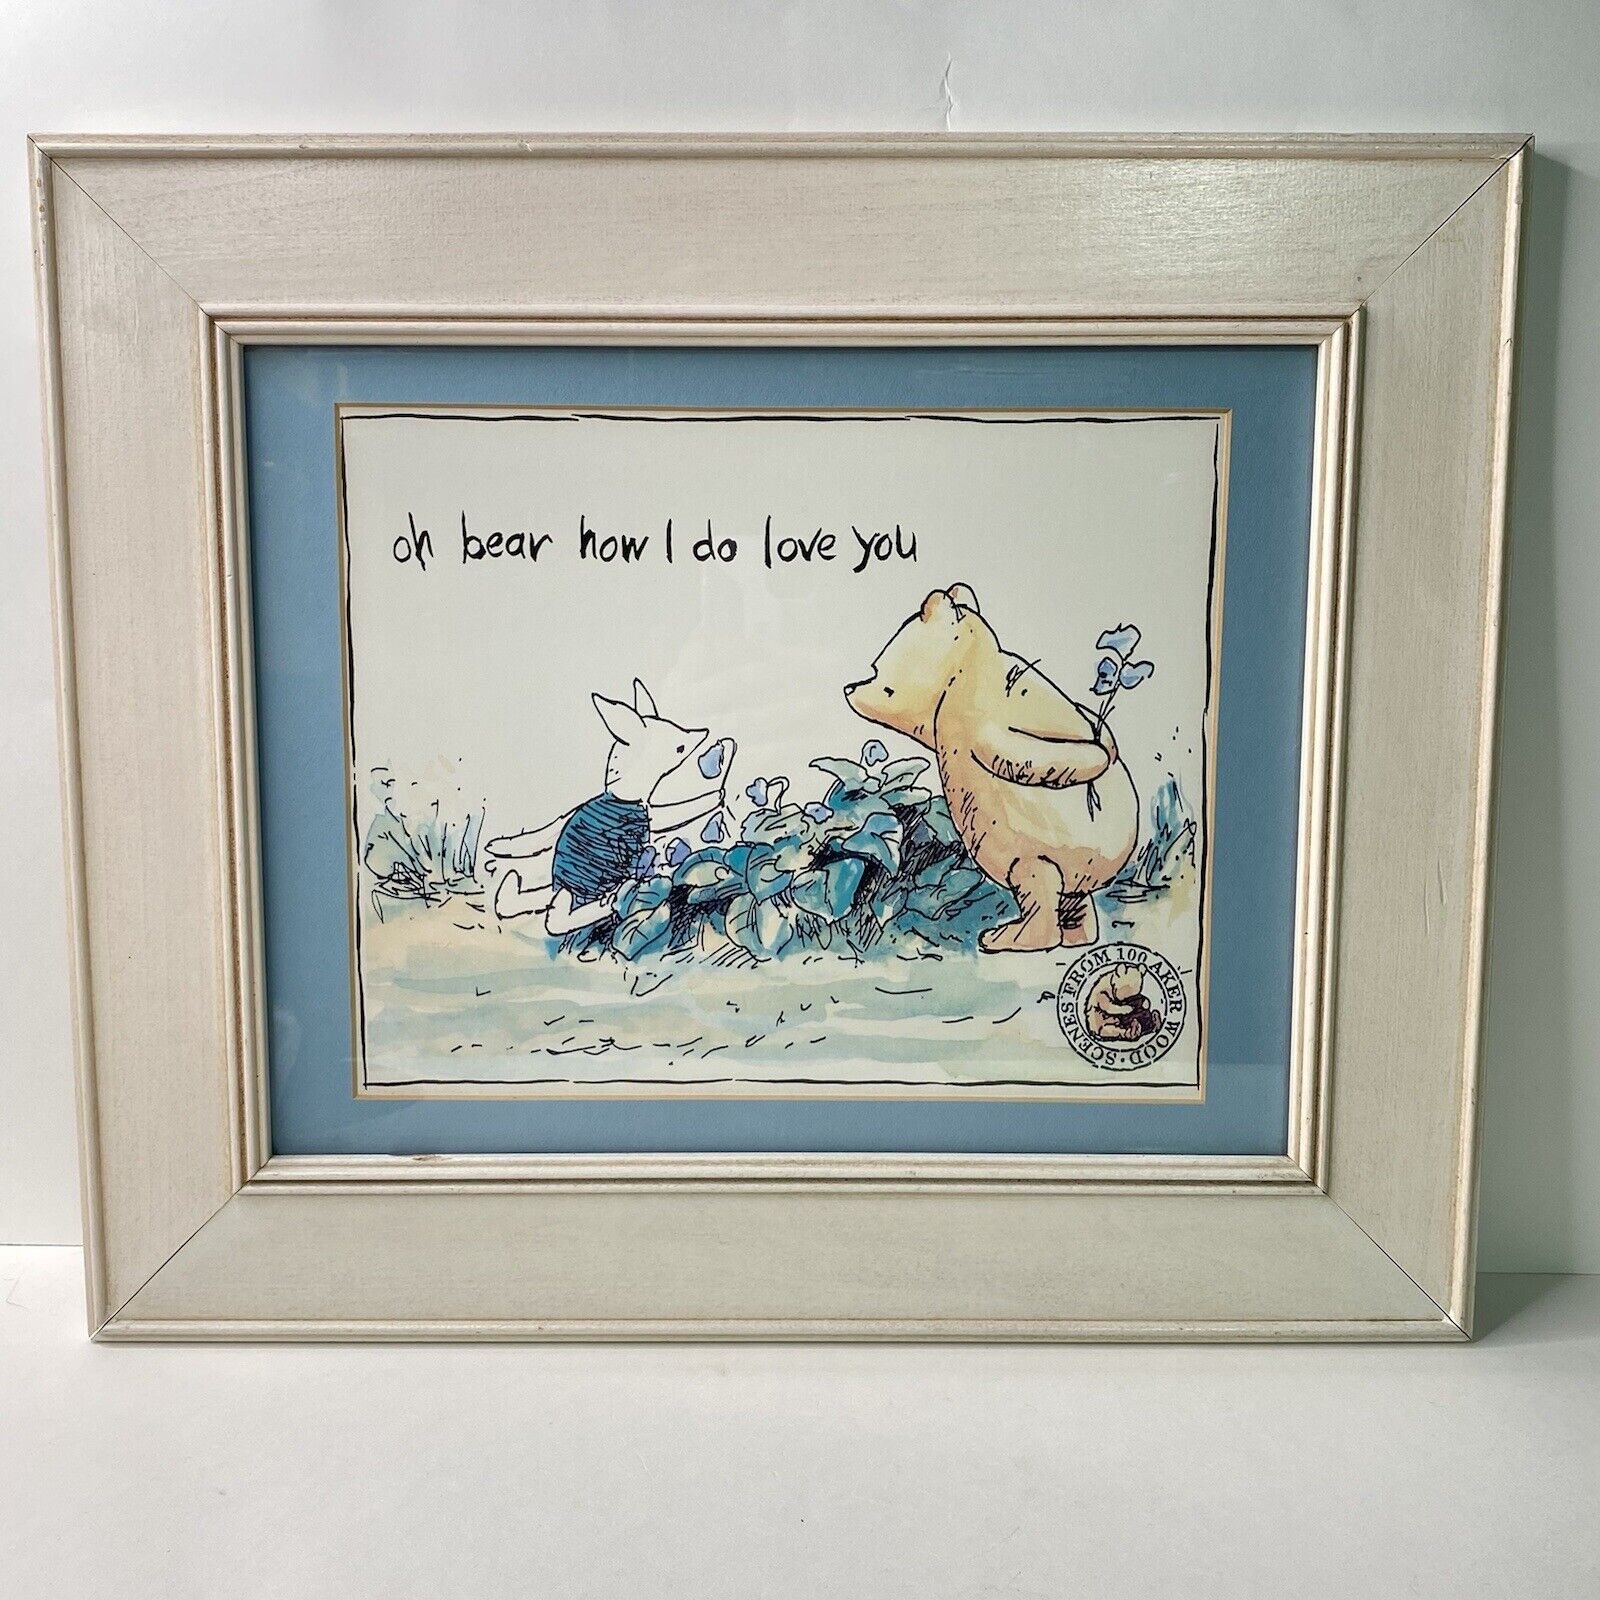 Disney Winnie The Pooh 100 Acre Wood Series Framed Art Matted Classic Piglet 18”